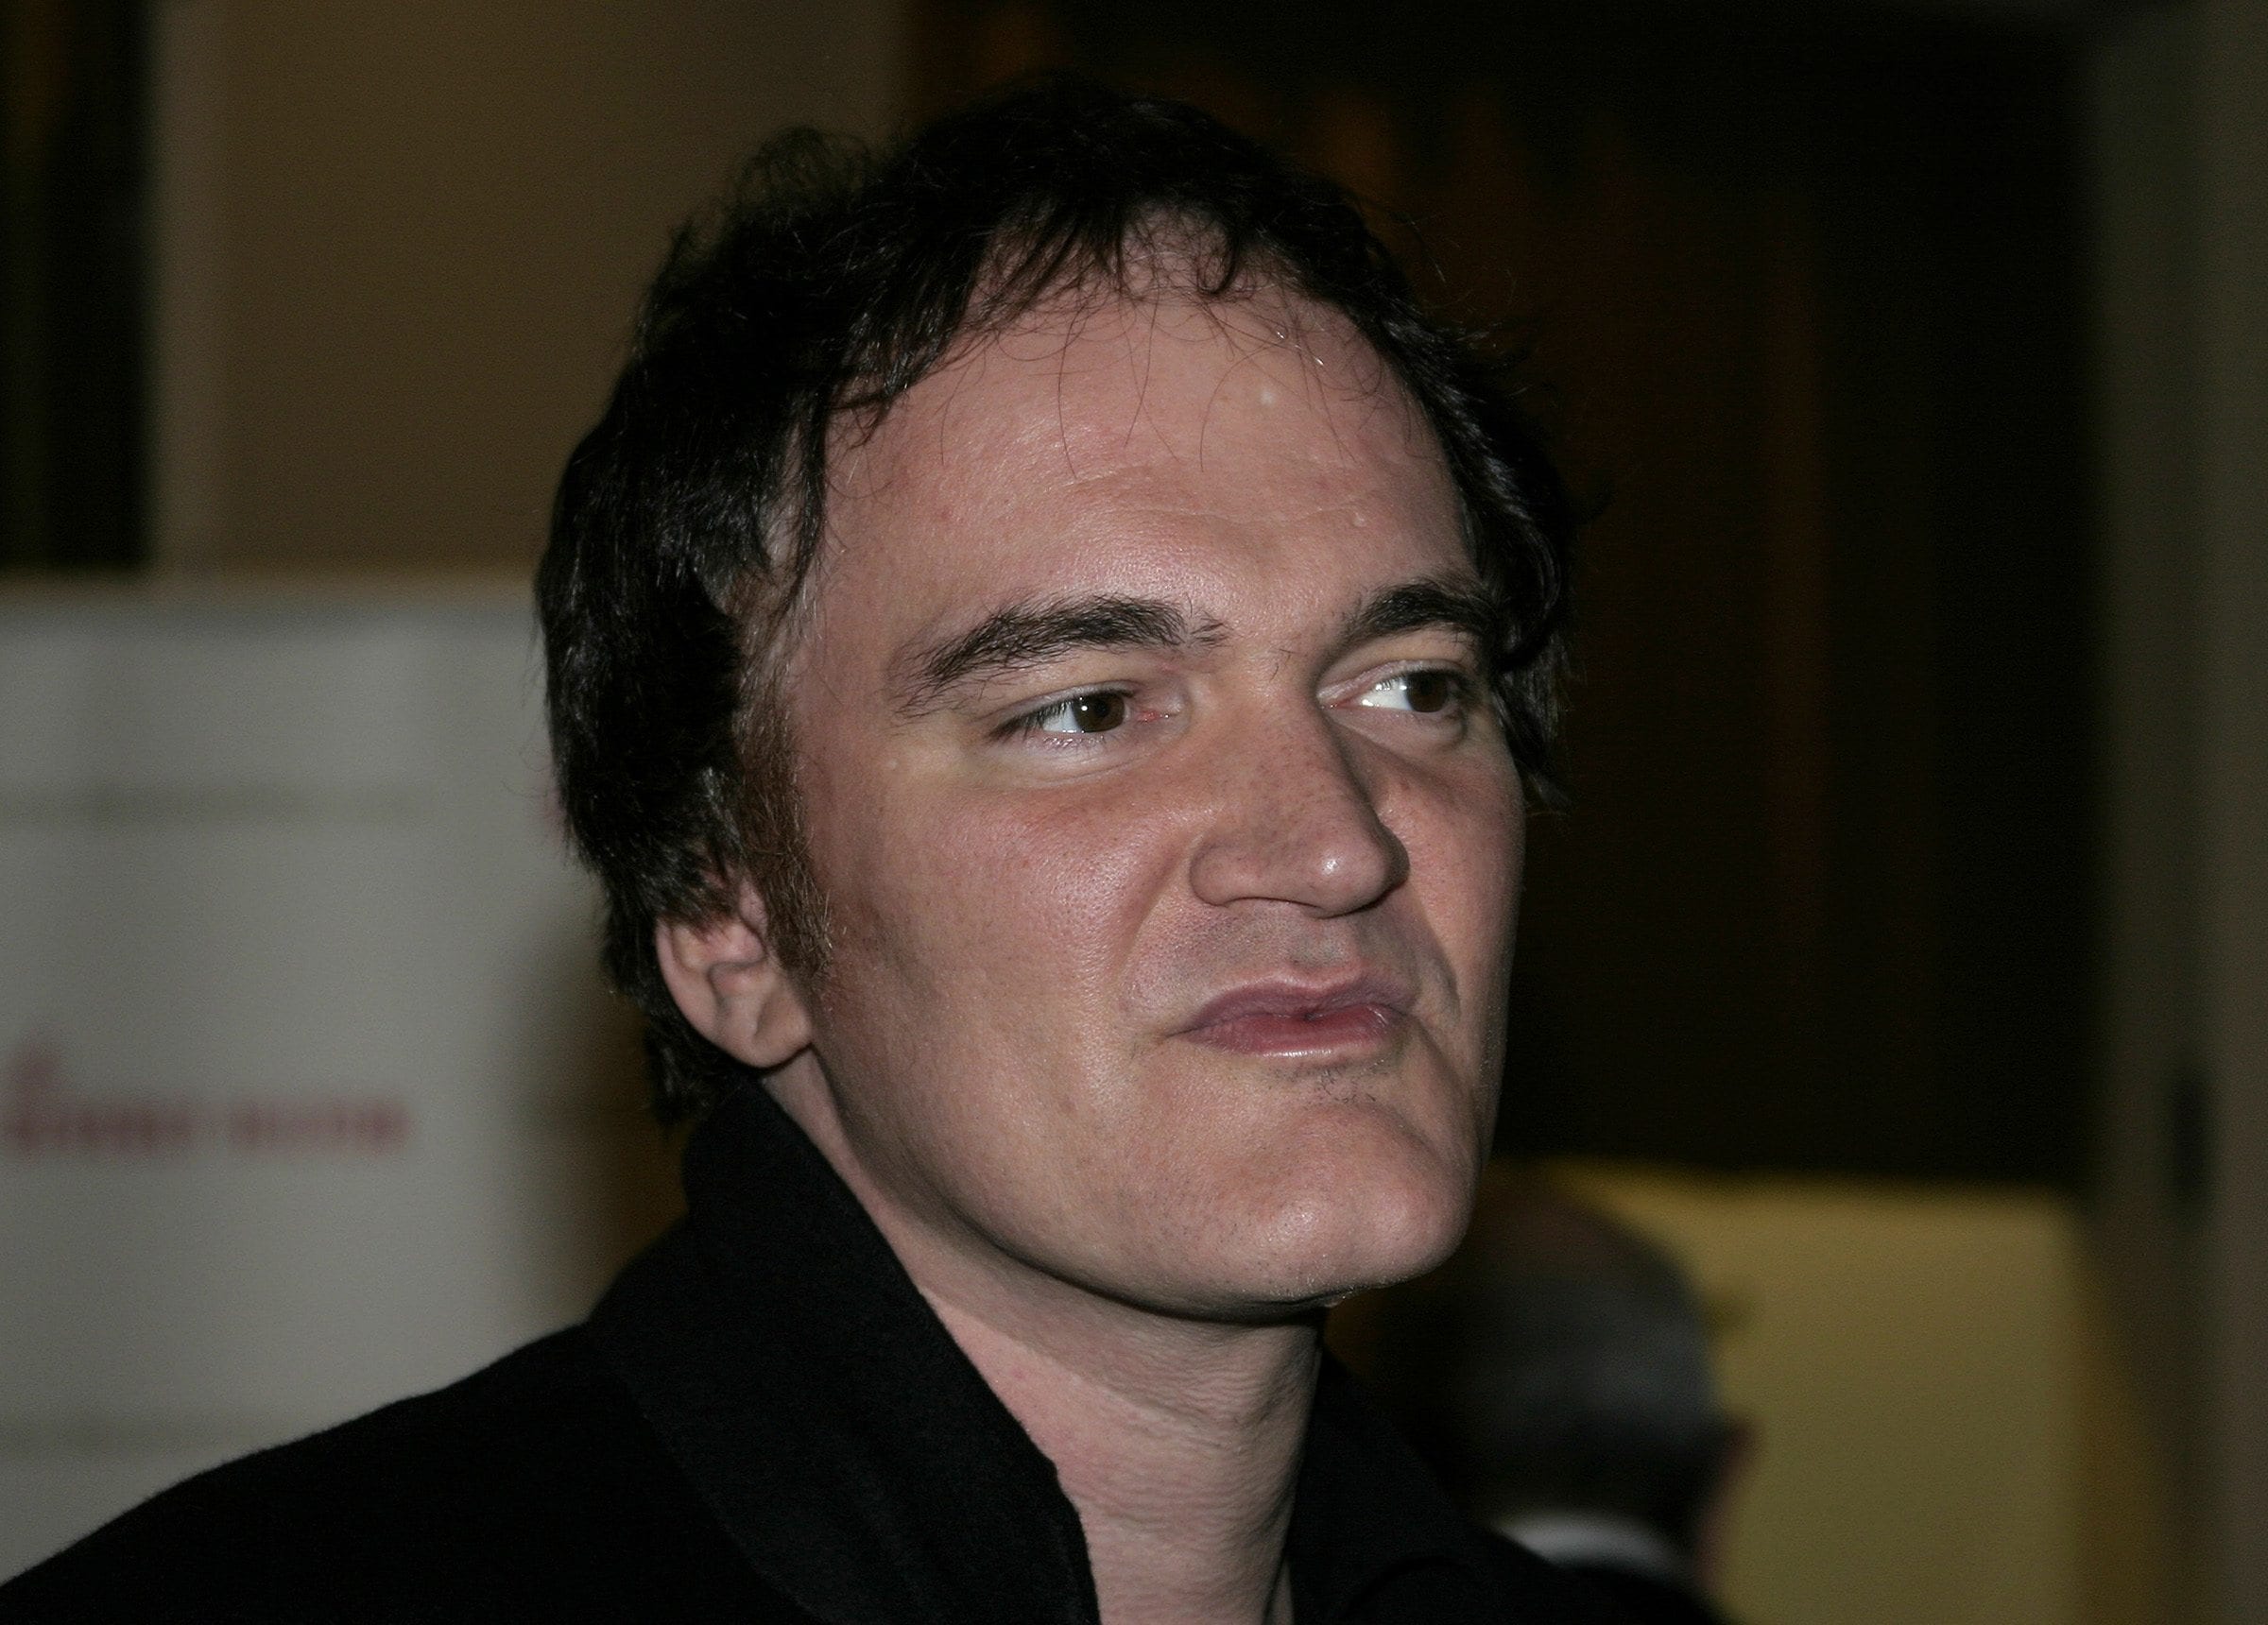 Hollywood’s self-appointed king of exploitation, Quentin Tarantino, is developing a script about the Manson Family murders.